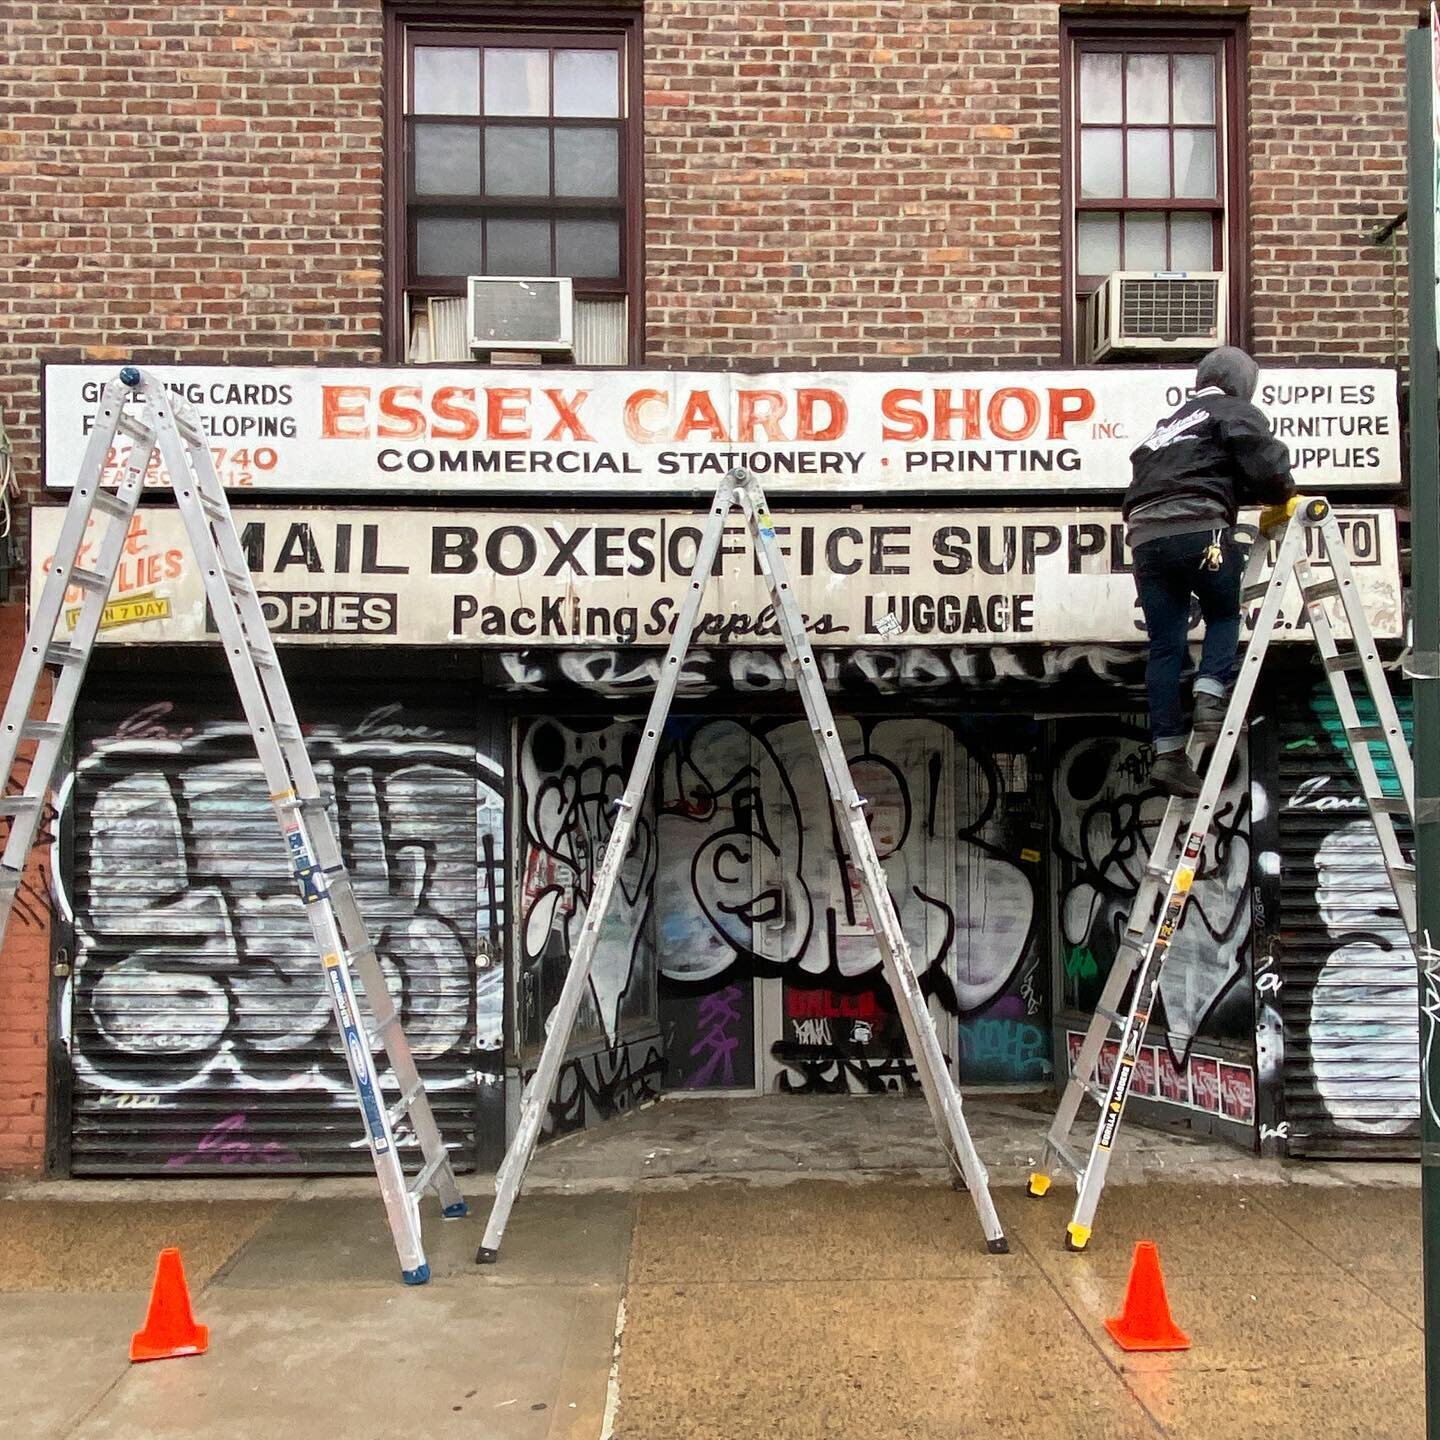 Essex Card Shop has been doing business on the Lower East Side for nearly 100 years and has seen five different owners in its storied existence. You may have heard that the shop was destroyed this past January in a tragic fire. Current owner Jay Pate